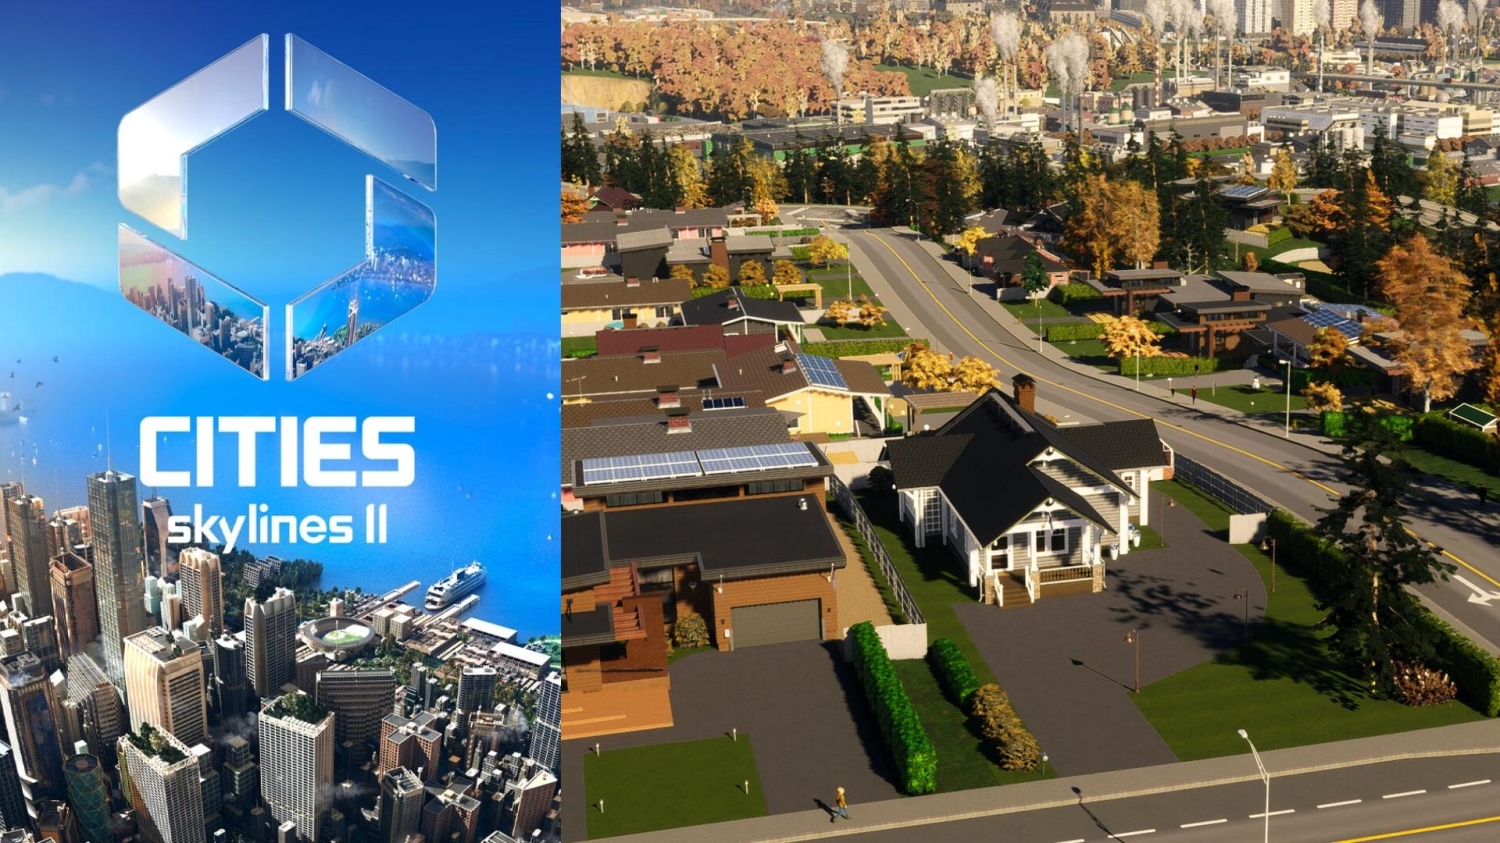 Cities: Skylines 2 developer says 'performance is not a dealbreaker' for  releasing a game